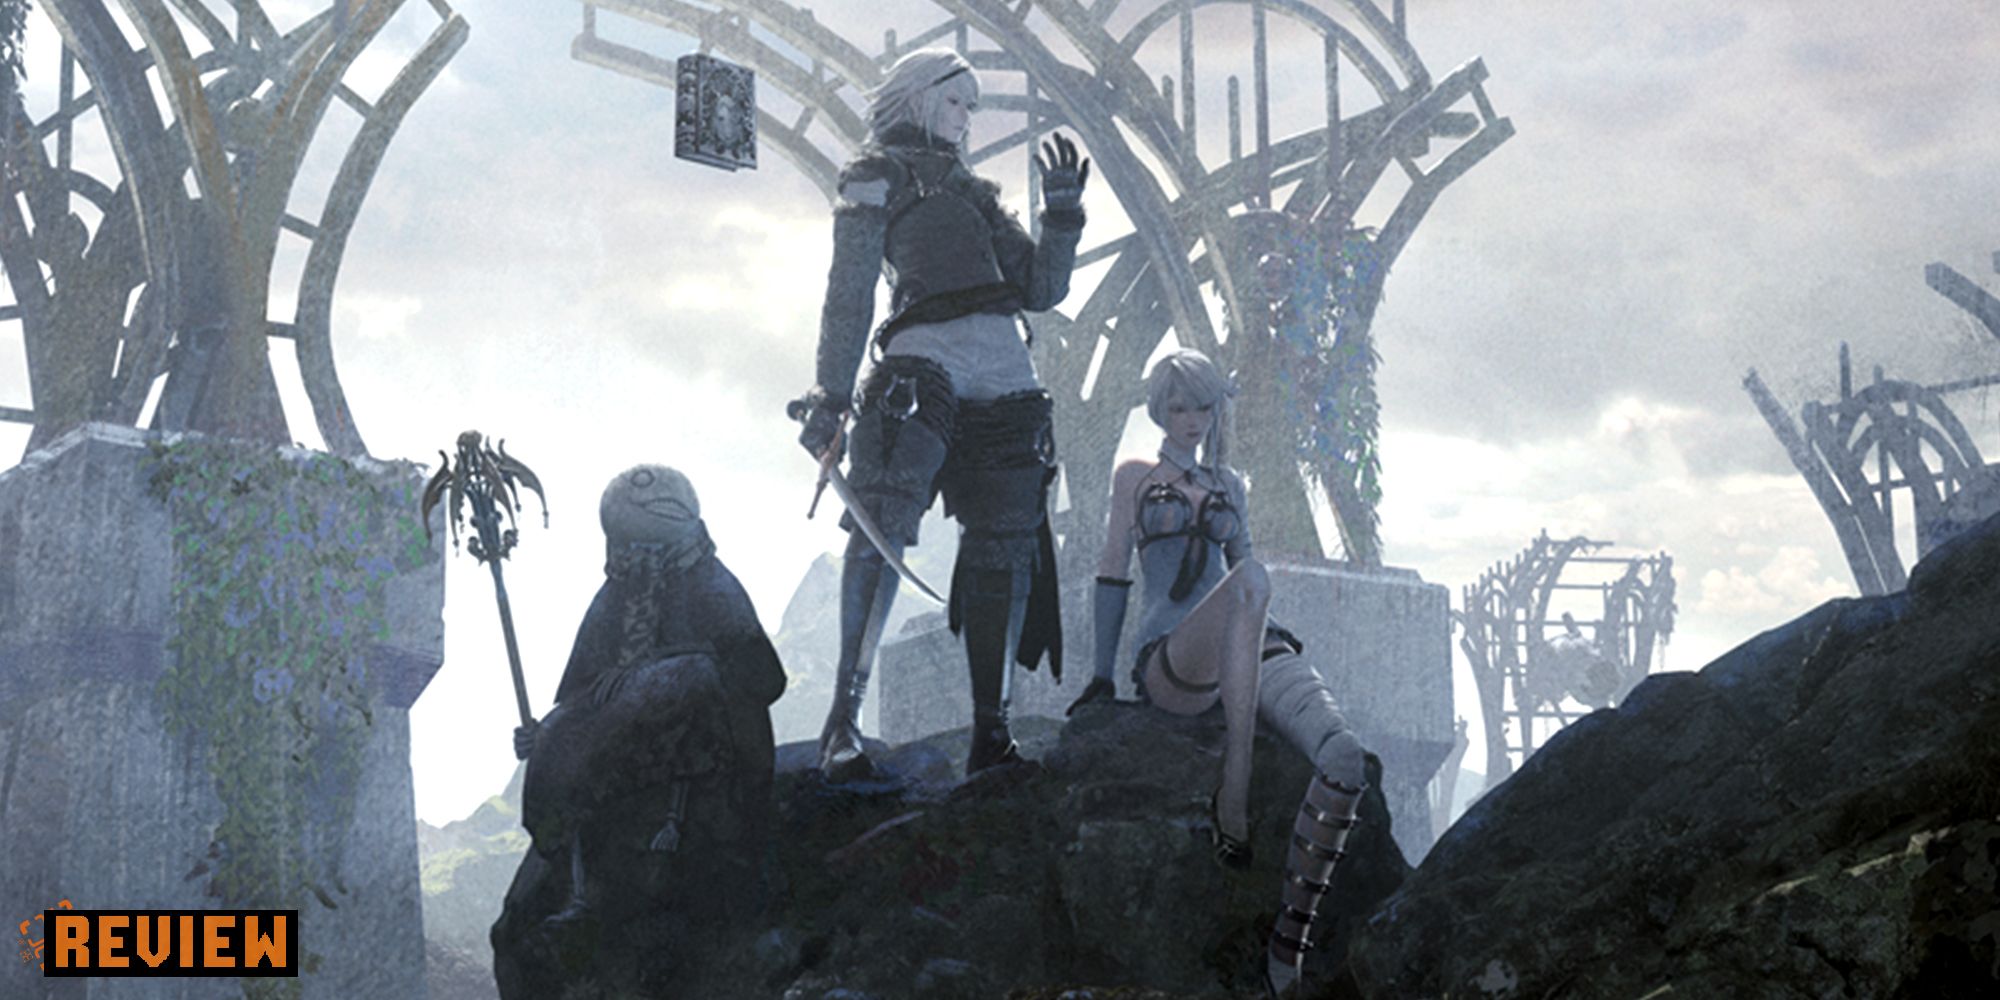 Game art from Nier Replicant Ver. 1.22474487139.